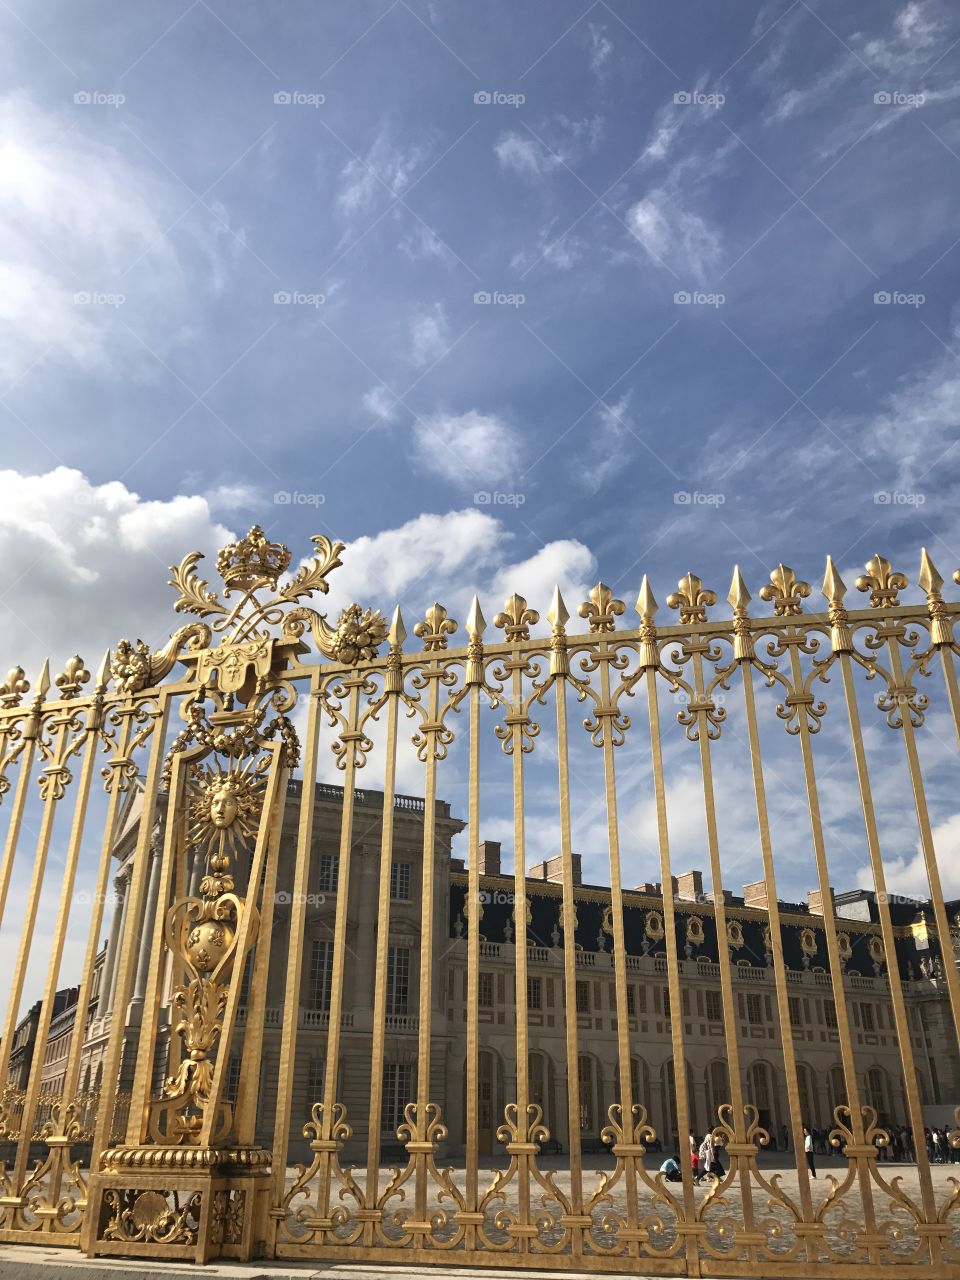 The Palace of Versailles. 